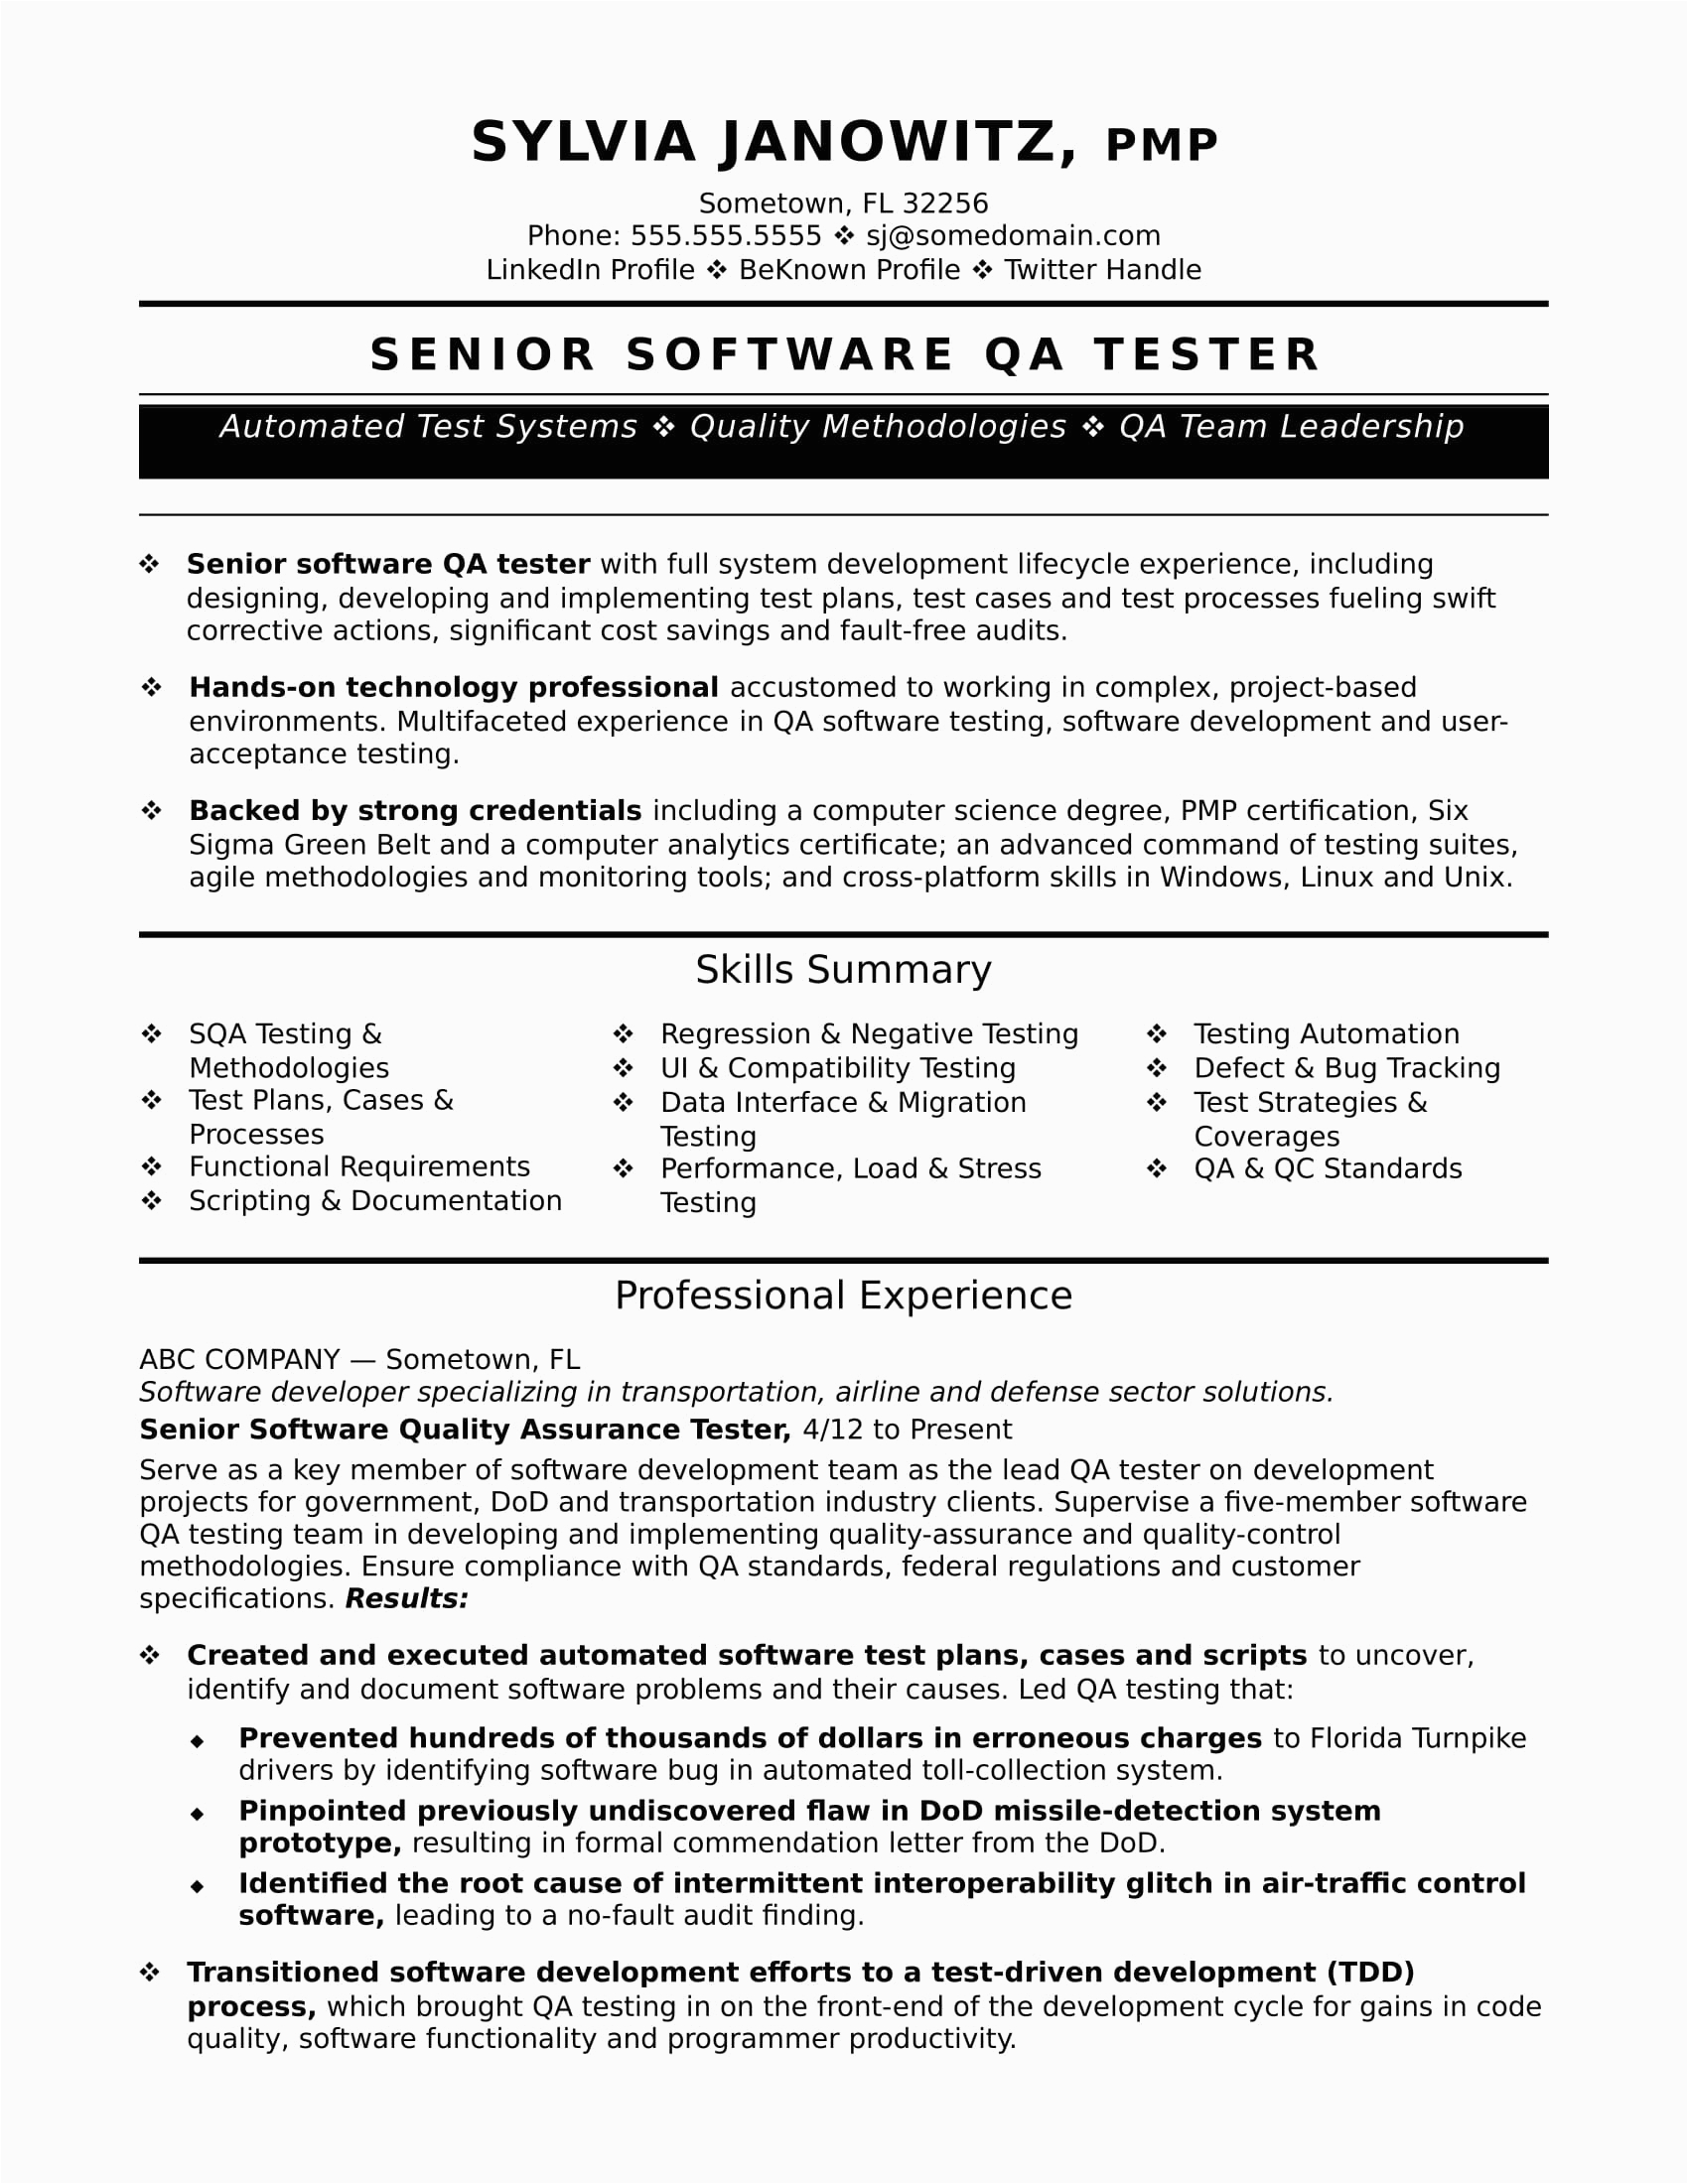 Sample Qa Resume with Agile Experience Experienced Qa software Tester Resume Sample